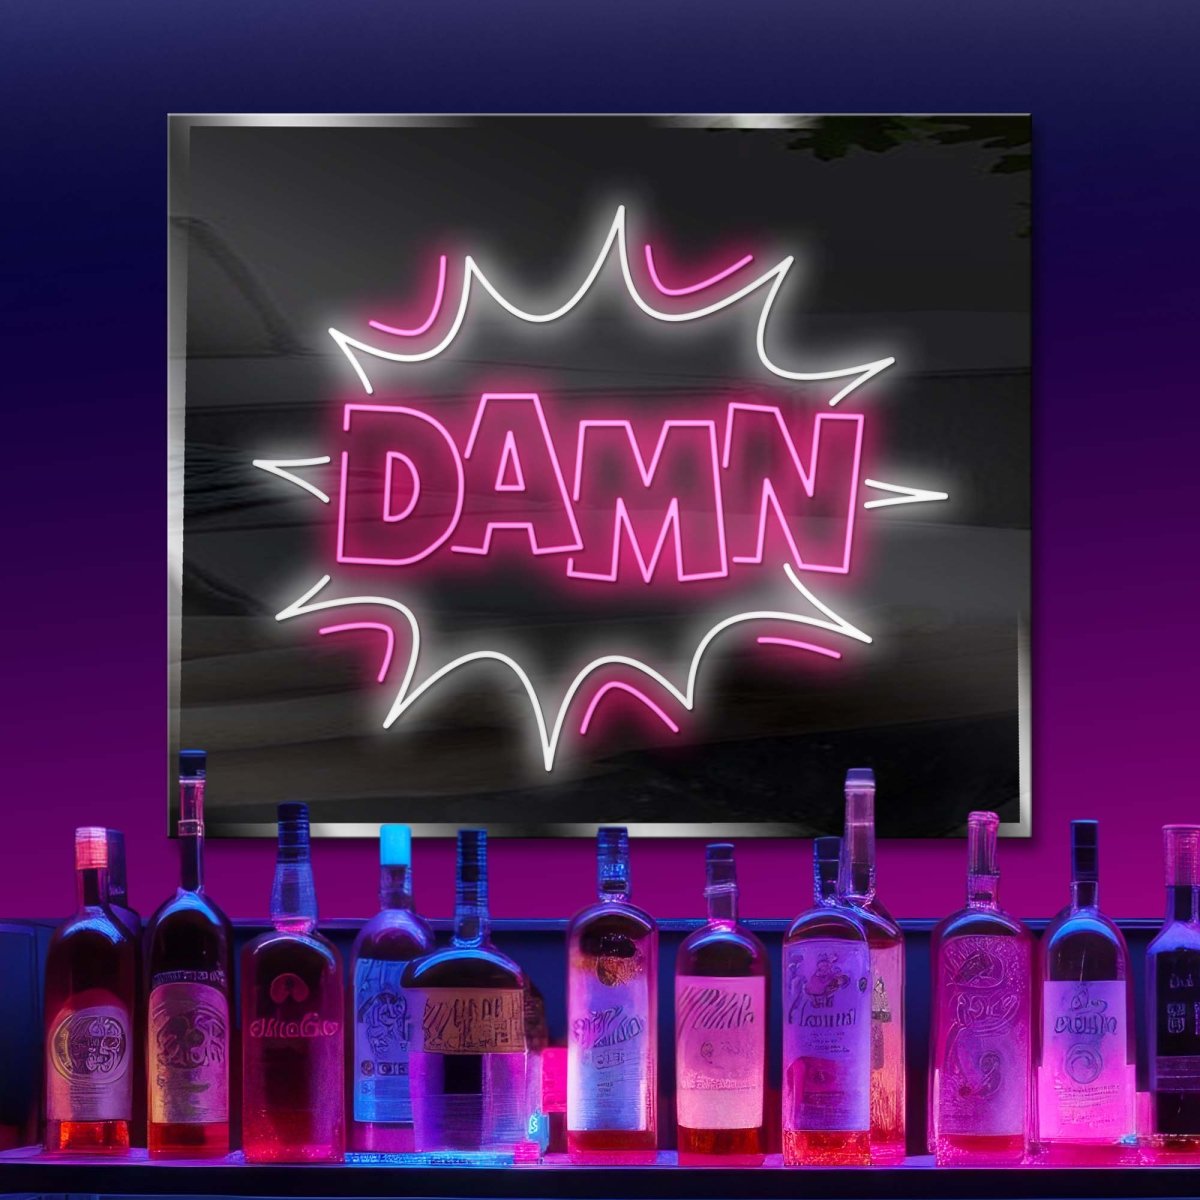 Personalized Neon Sign Damn - madaboutneon